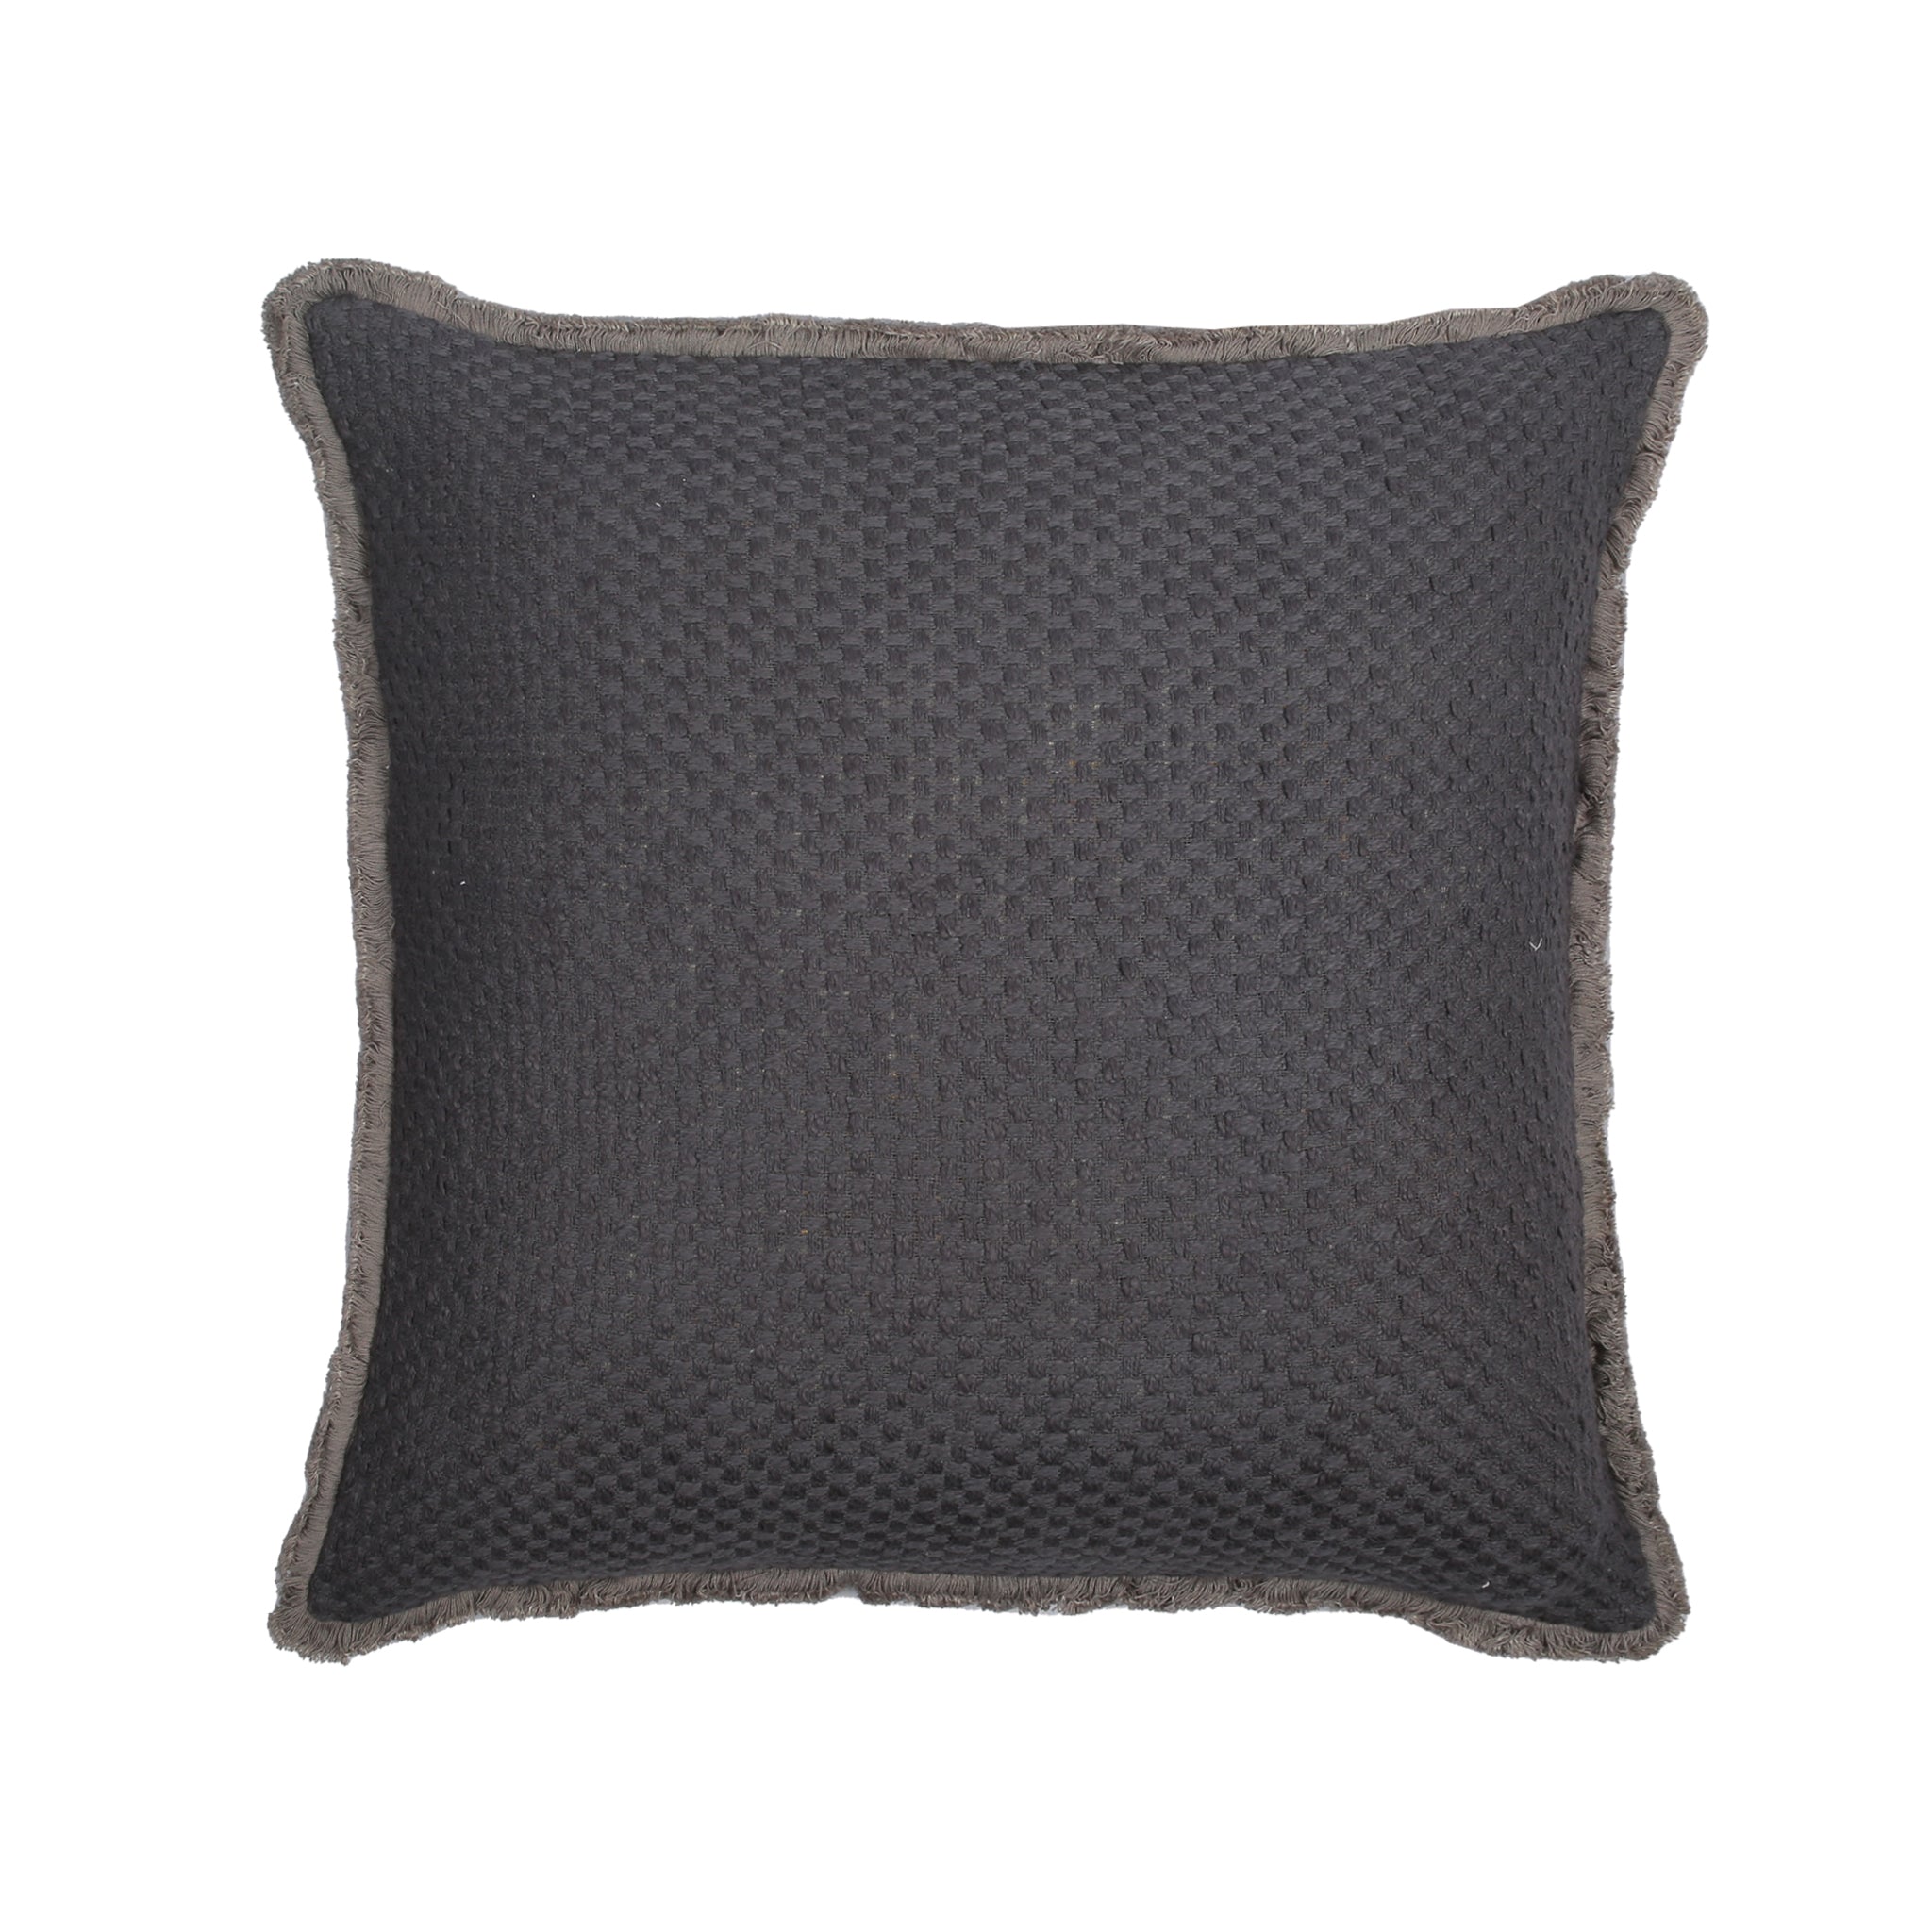 Cushion Cover - Plain Dyed Charcoal